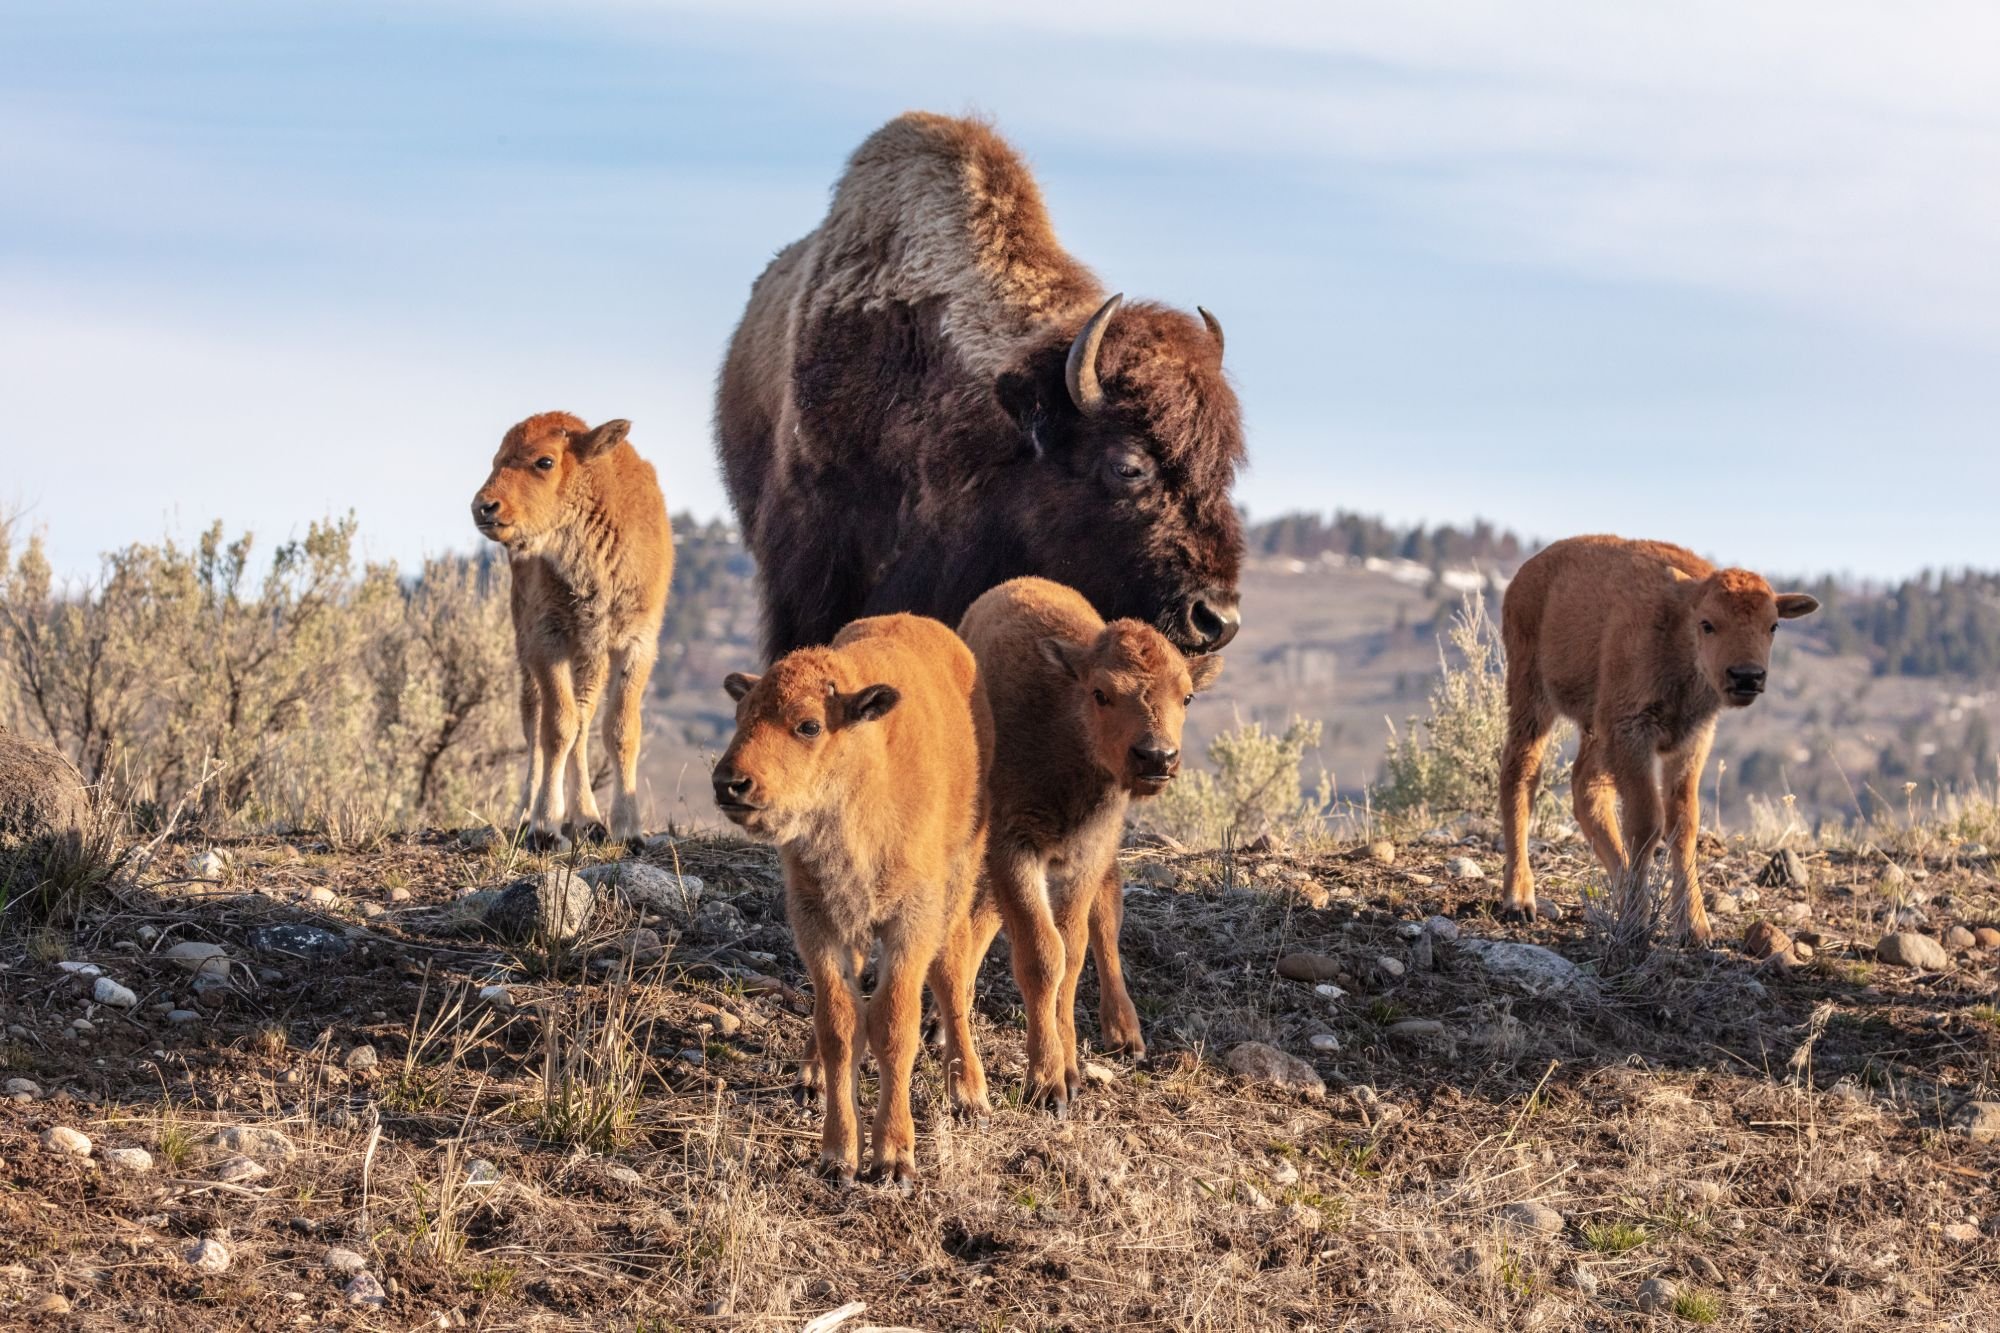 Four baby bison and an adult bison walking